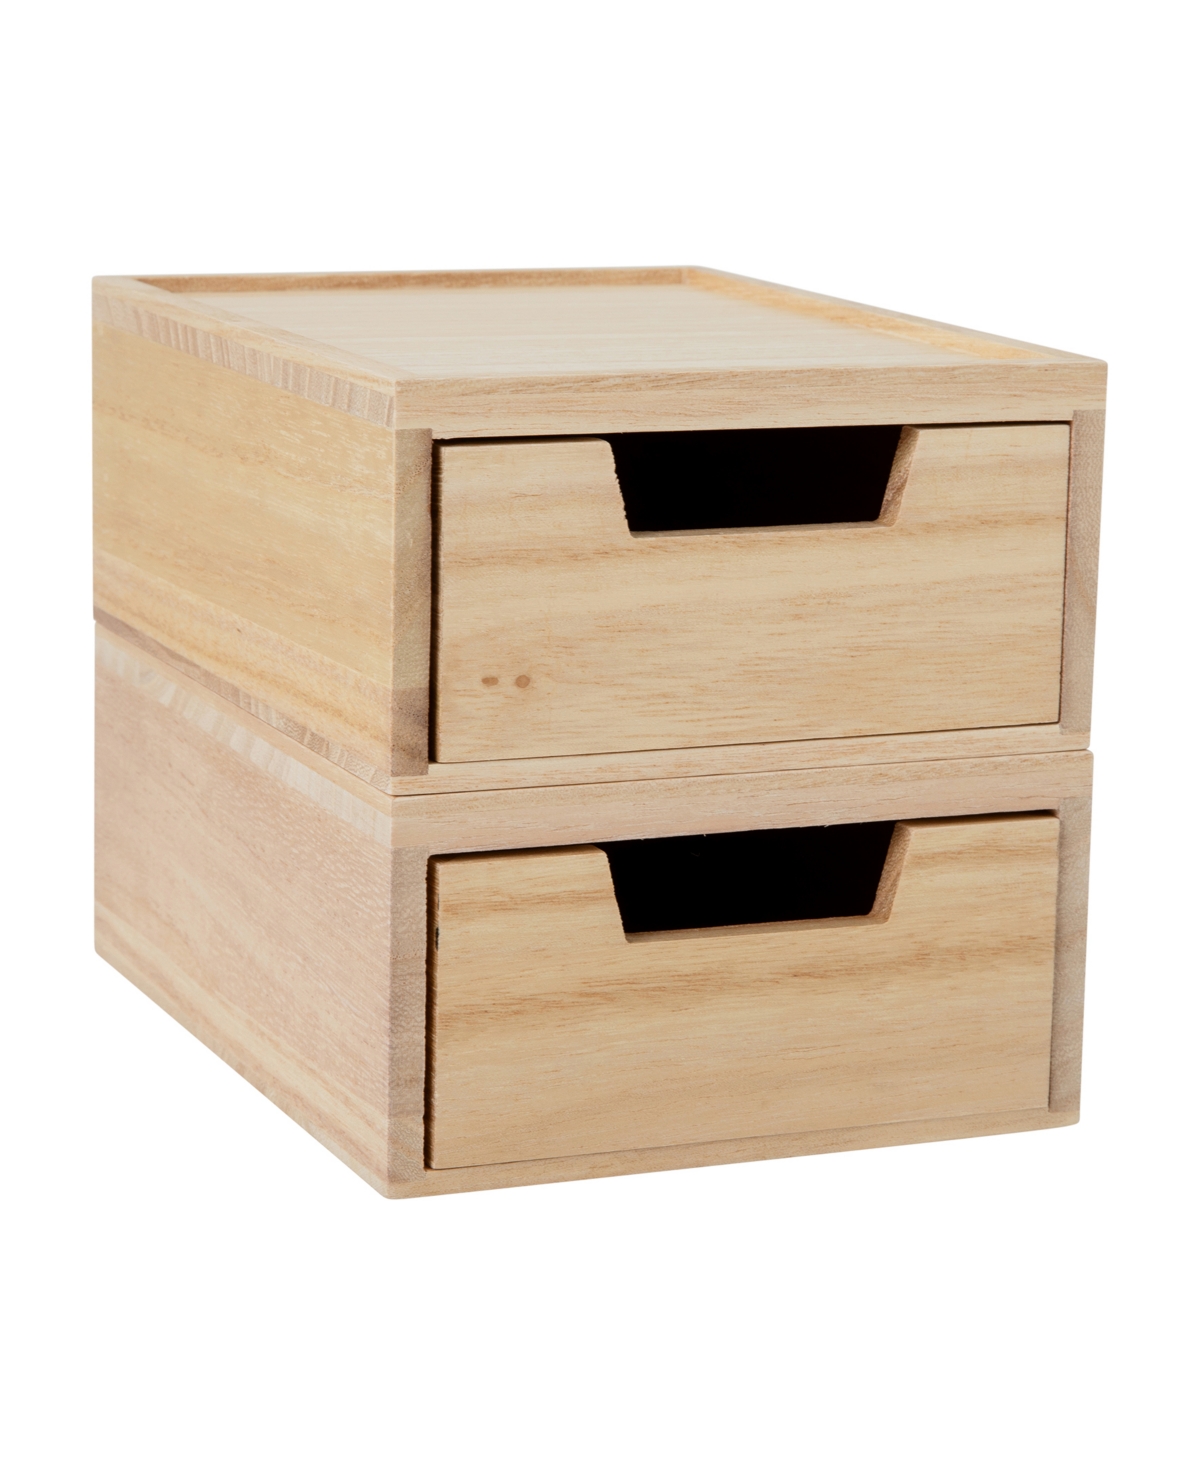 Martha Stewart Weston 2 Compartments Stackable Paulownia Wood Boxes With Drawers, Office Desktop Organizers In Light Natural